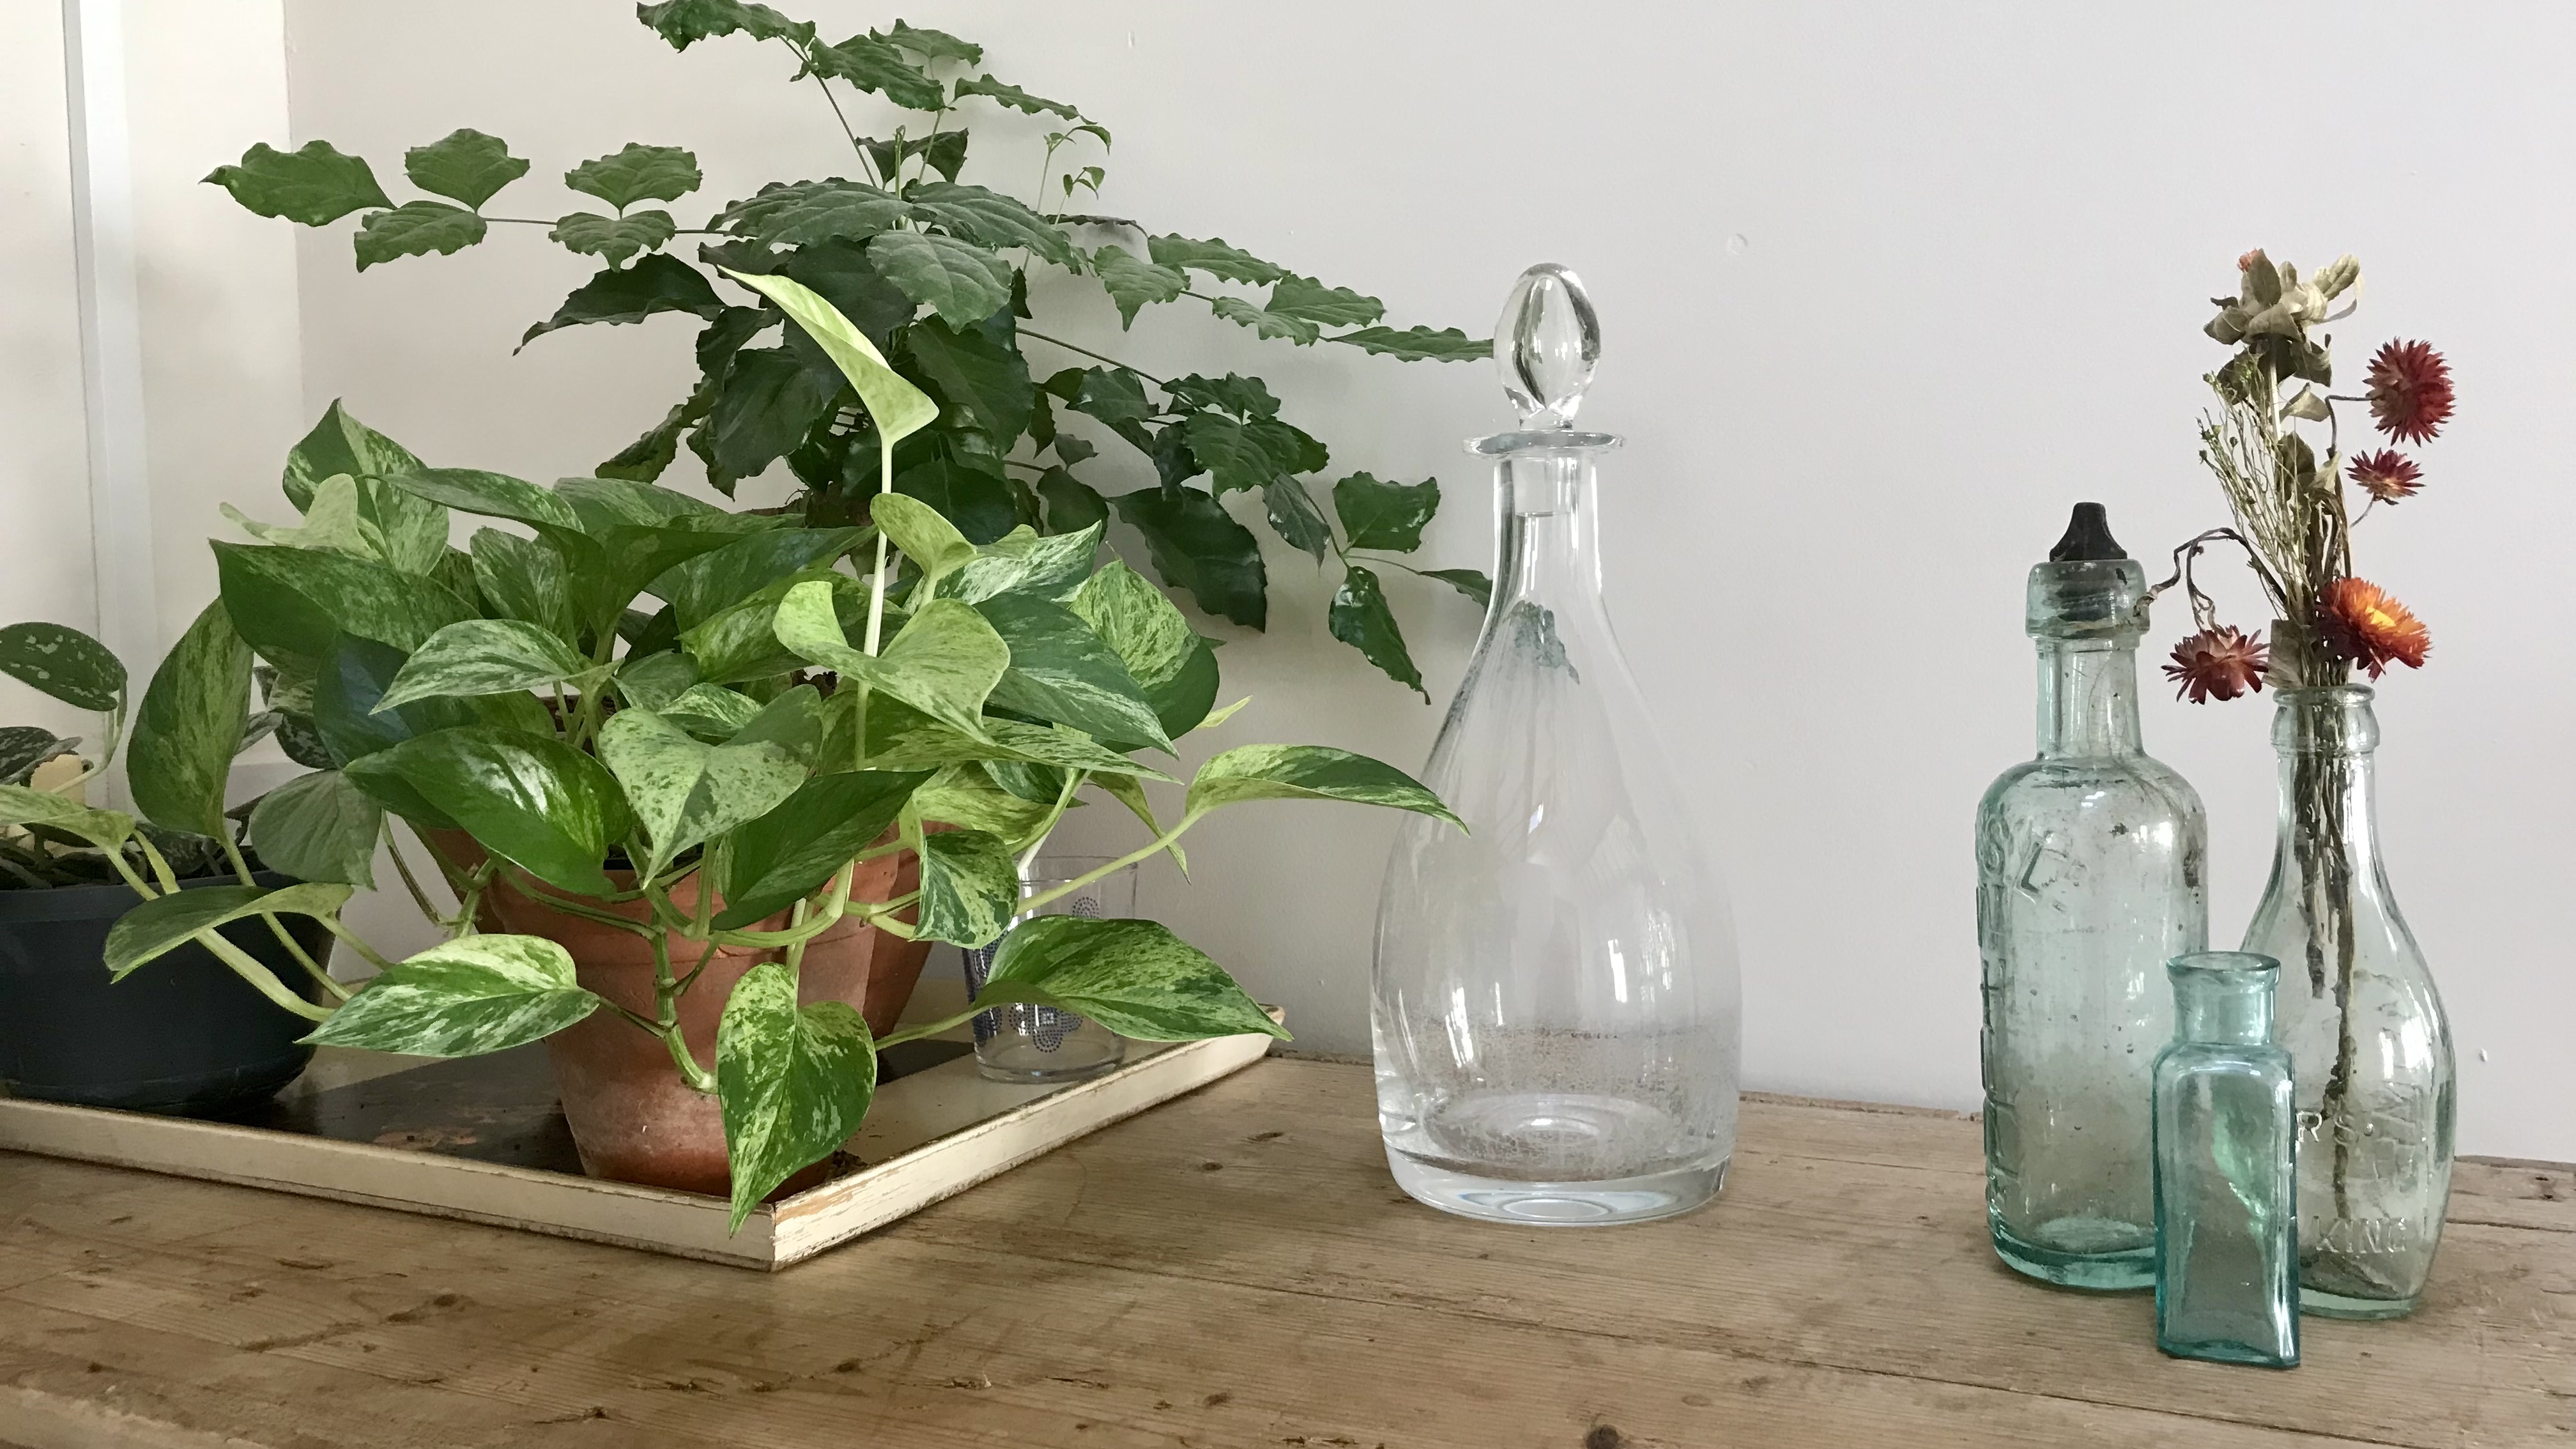 Collection of plants and glass bottles on a wooden unit